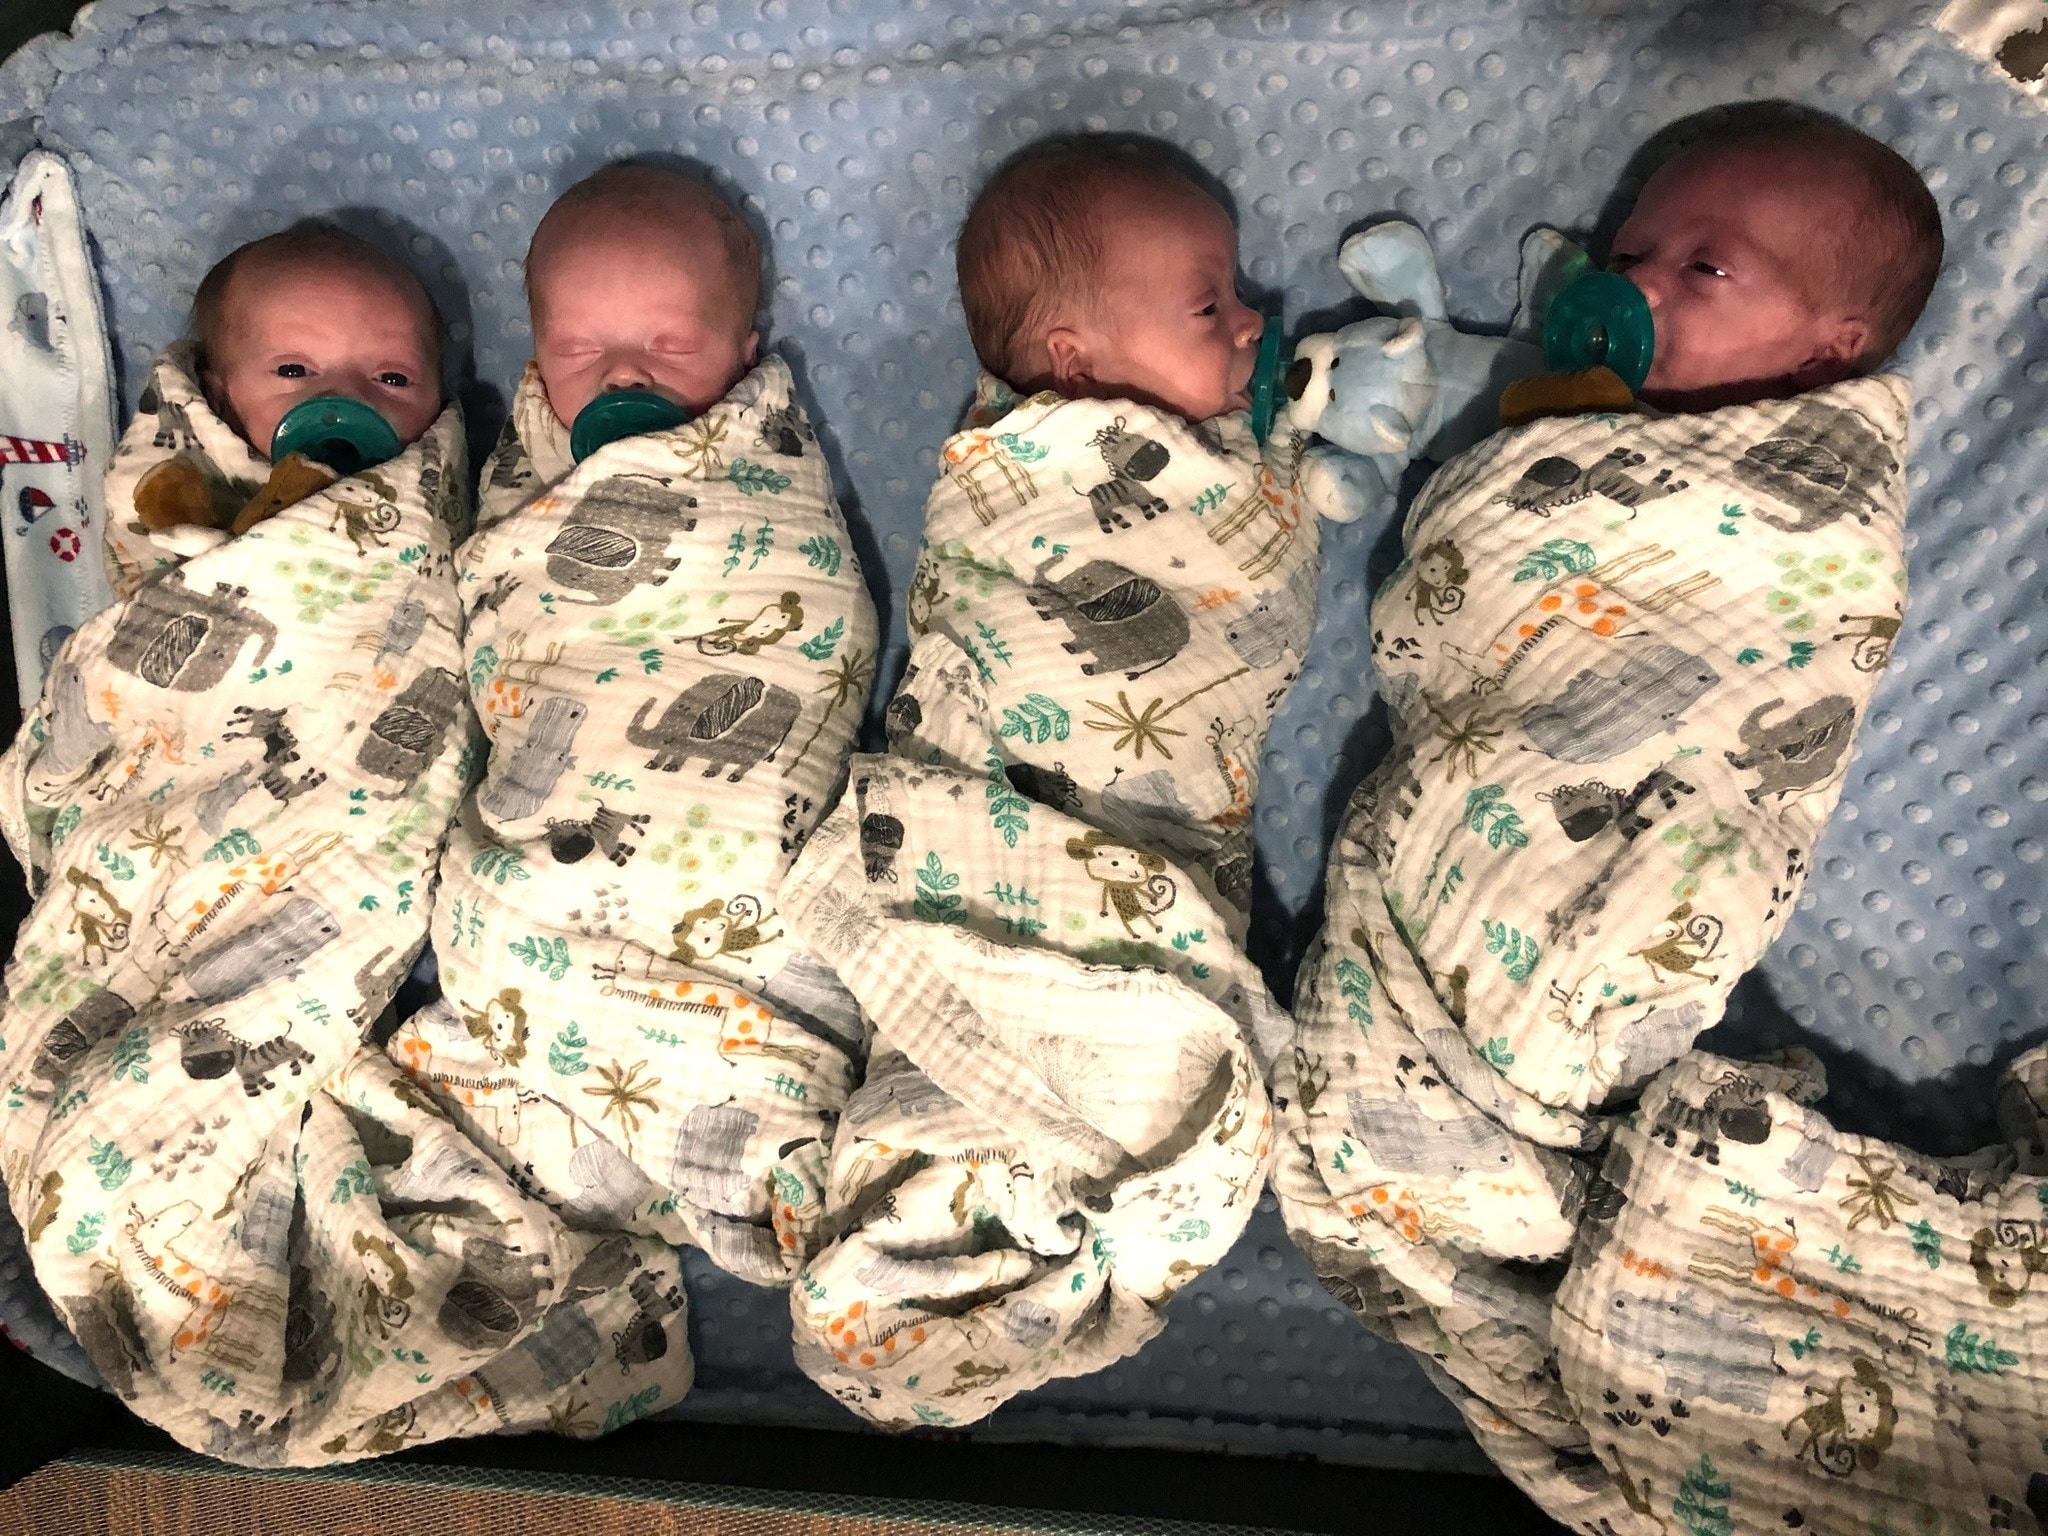 quadruplets laying side by side in a hospital